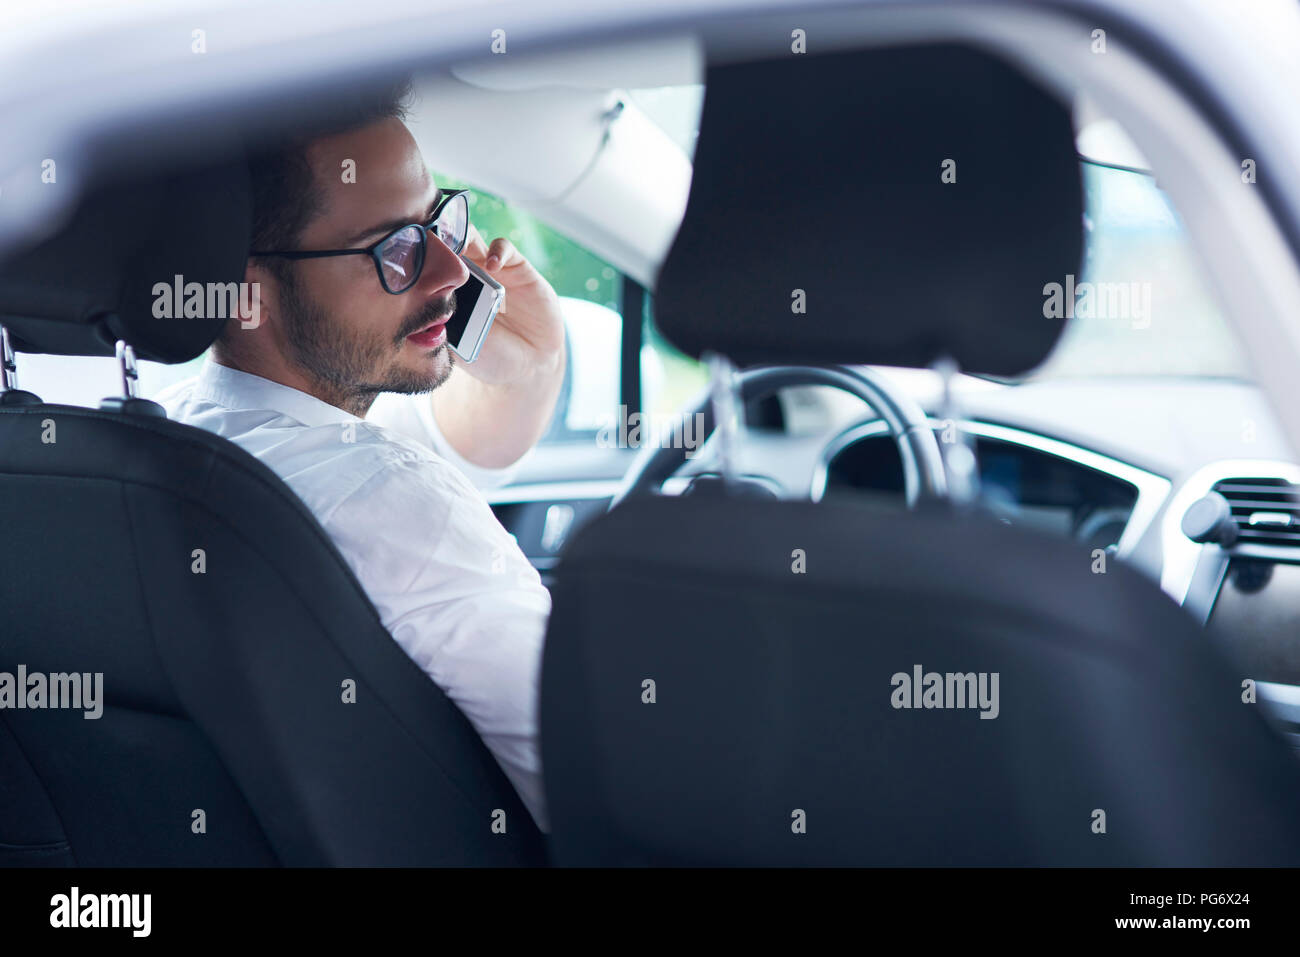 Businessman sitting in car talking on the phone Stock Photo